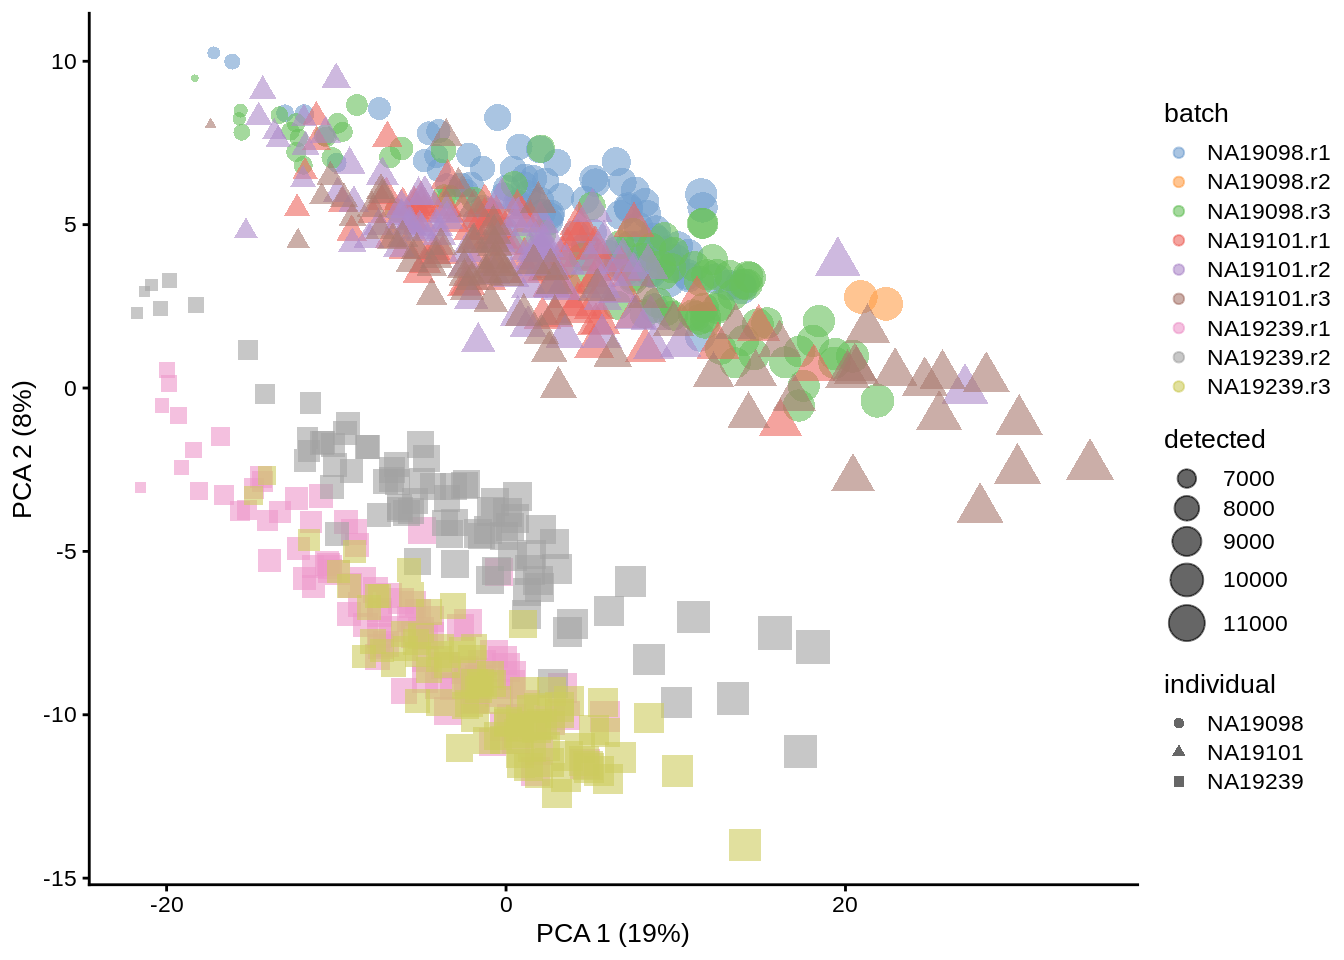 PCA plot of the Tung data (logcounts raw)